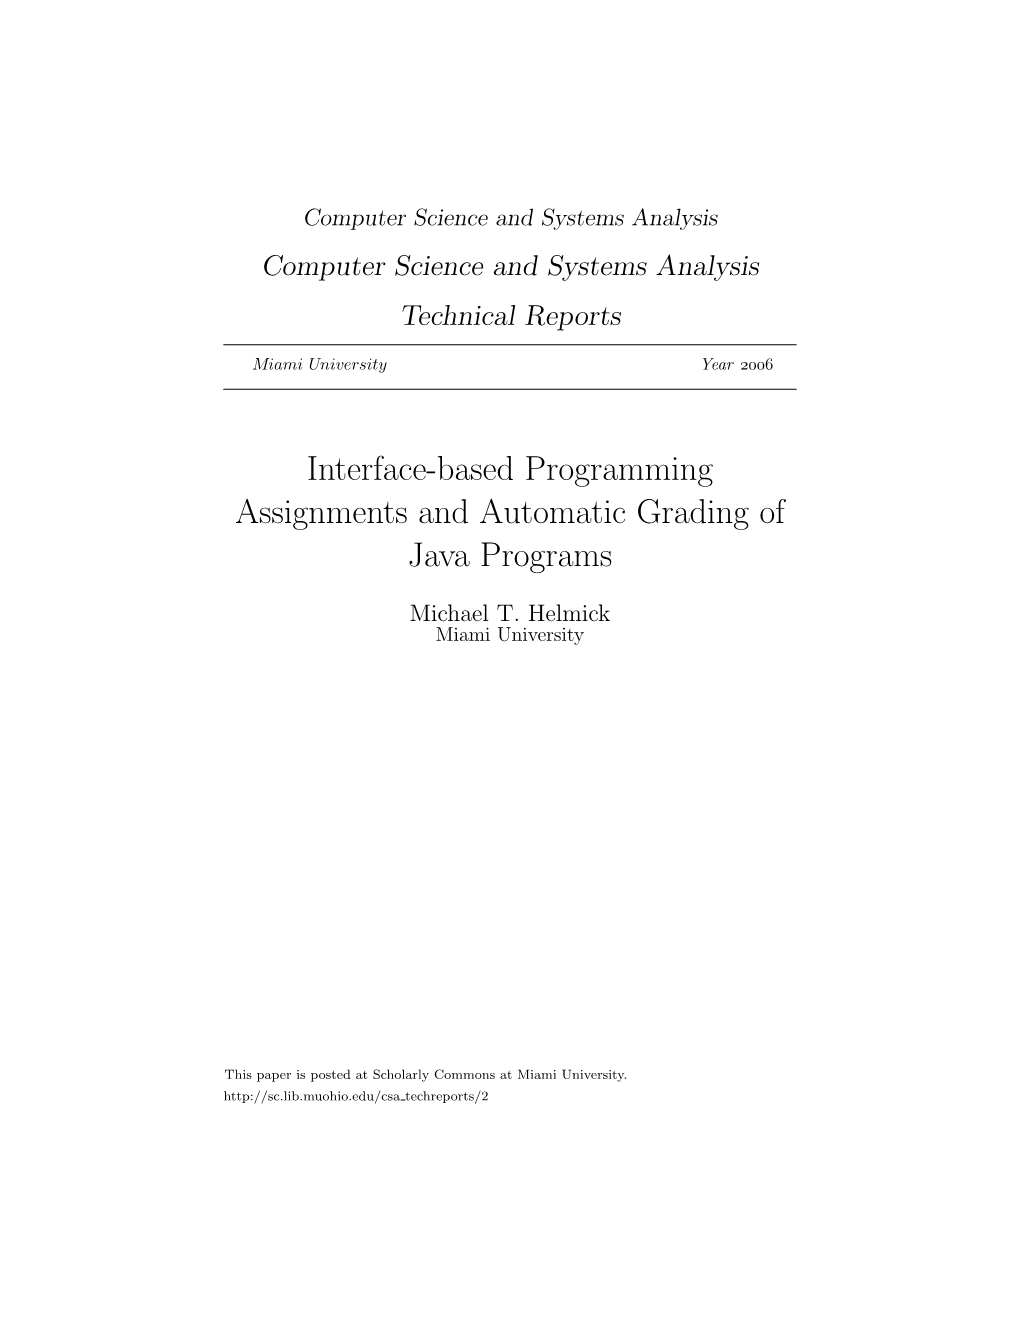 Interface-Based Programming Assignments and Automatic Grading of Java Programs